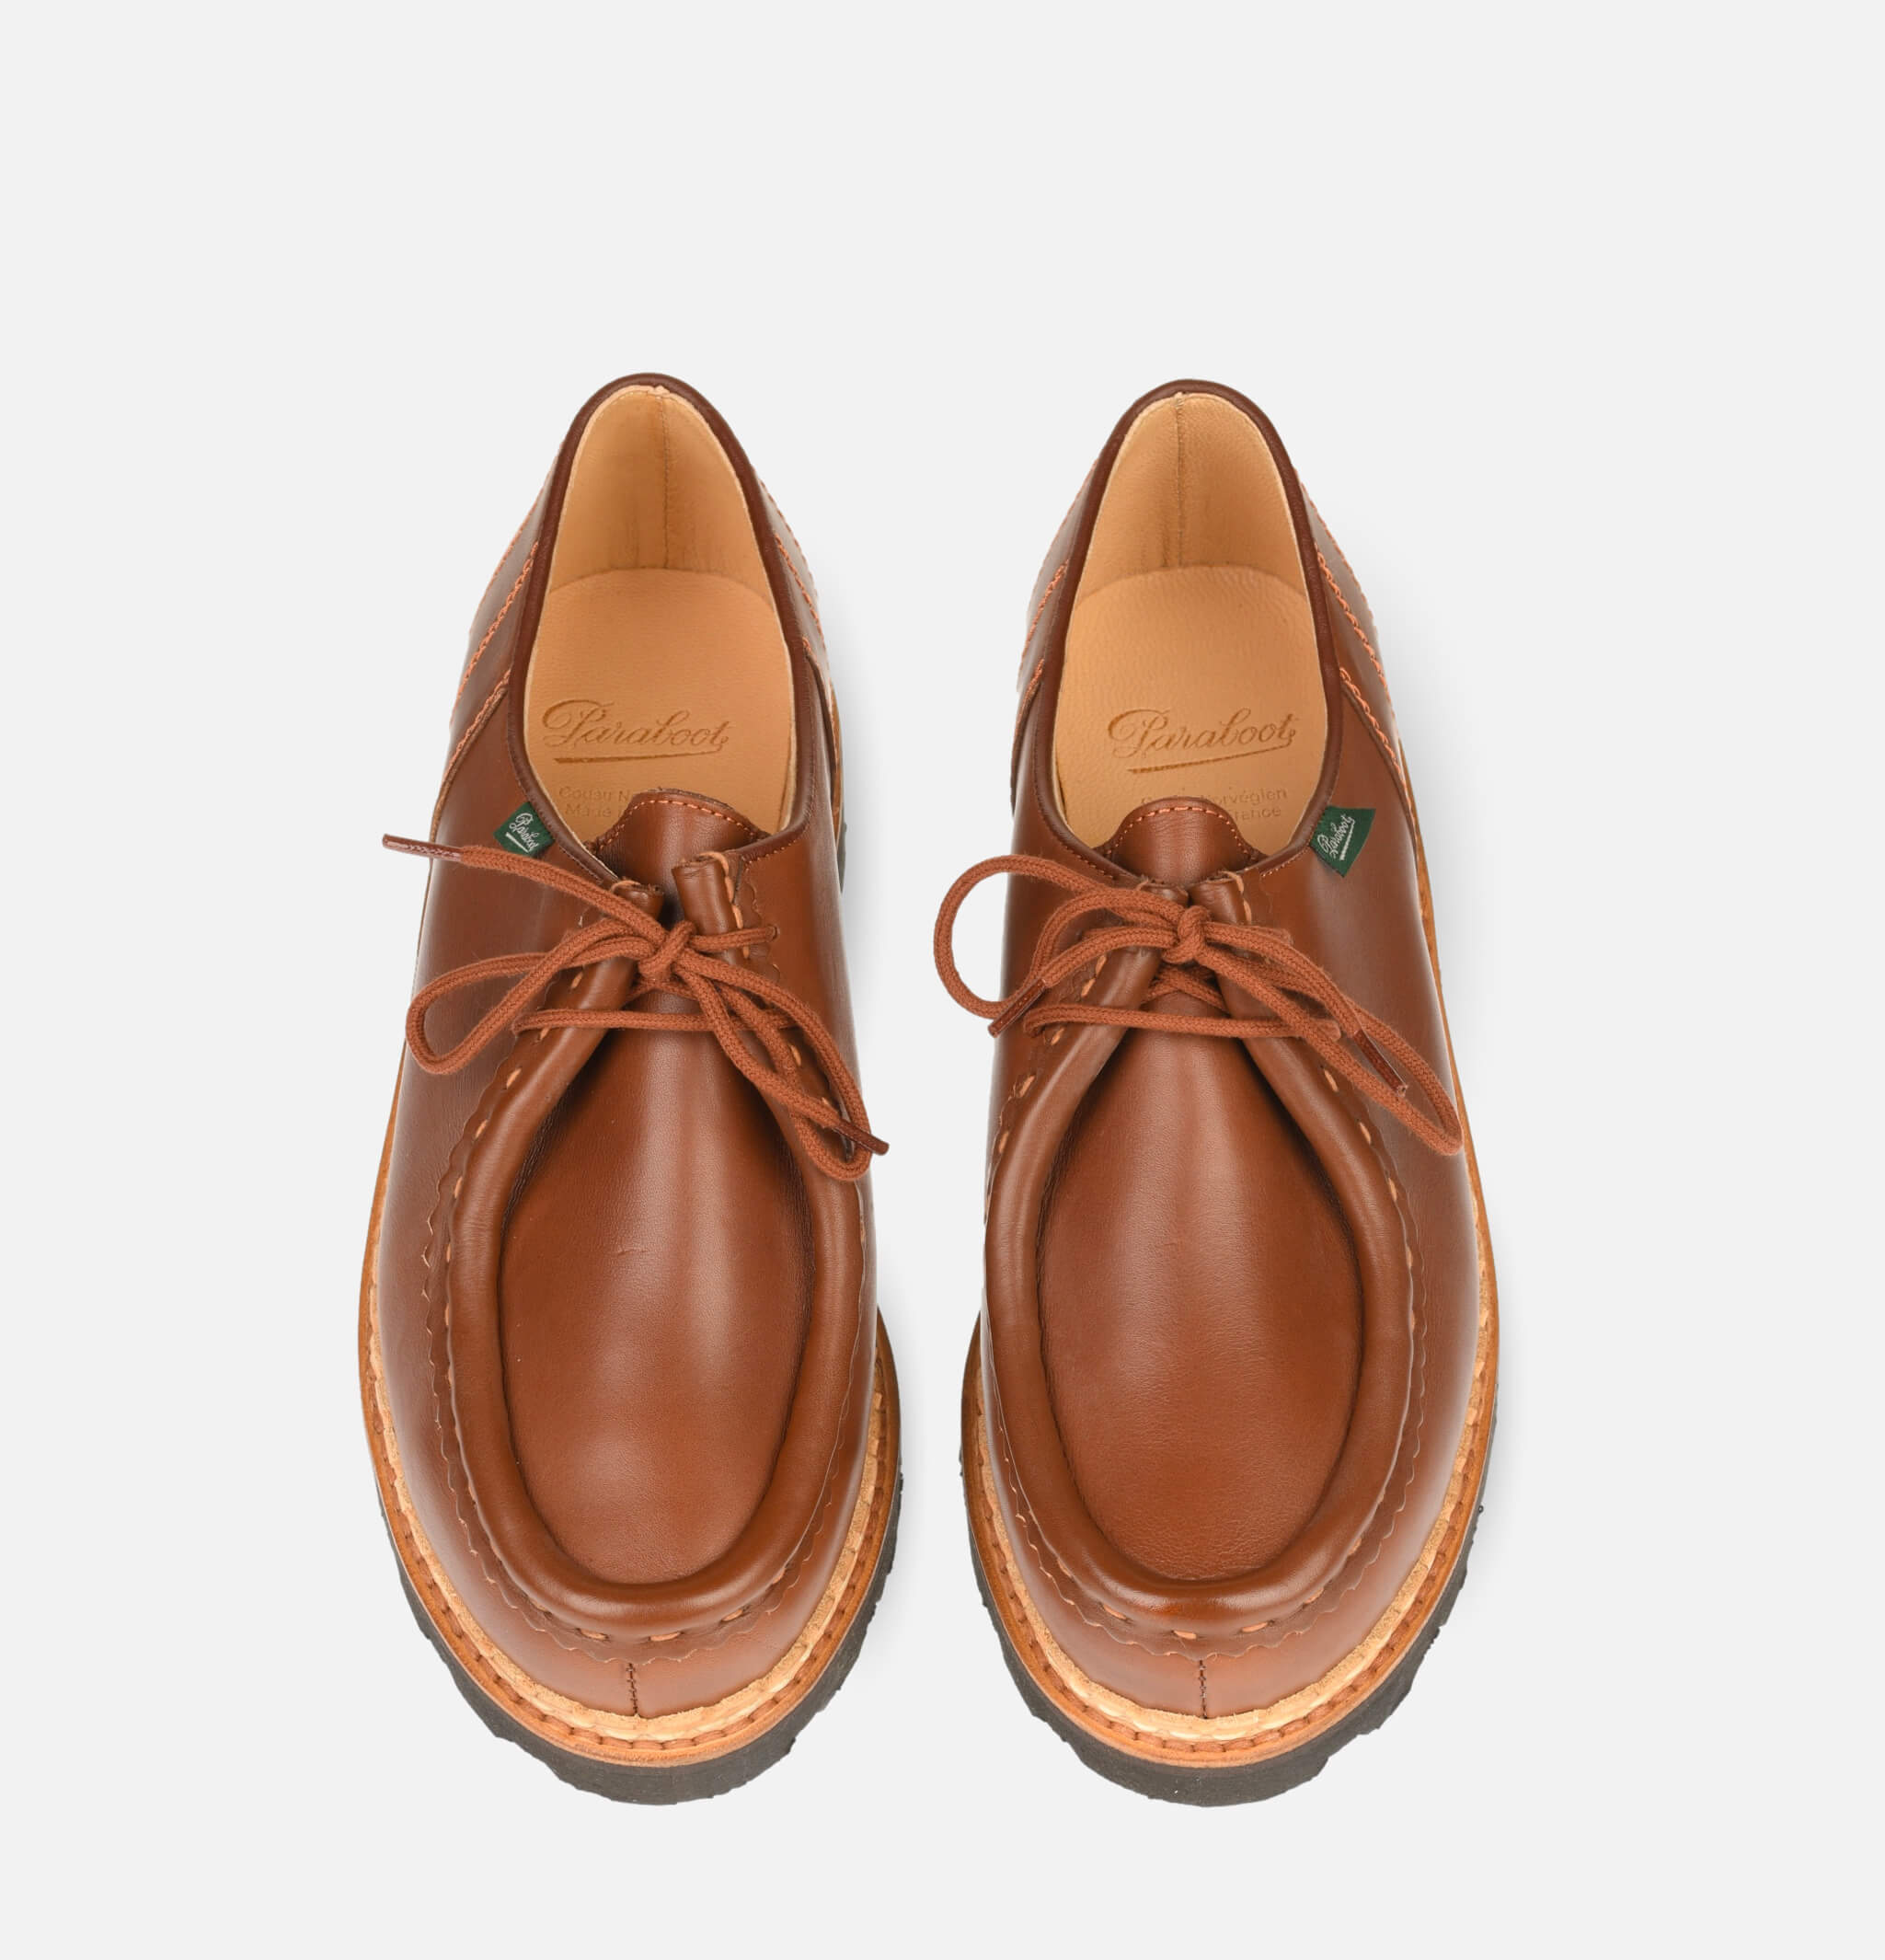 Paraboot Morzine Shoes Brown